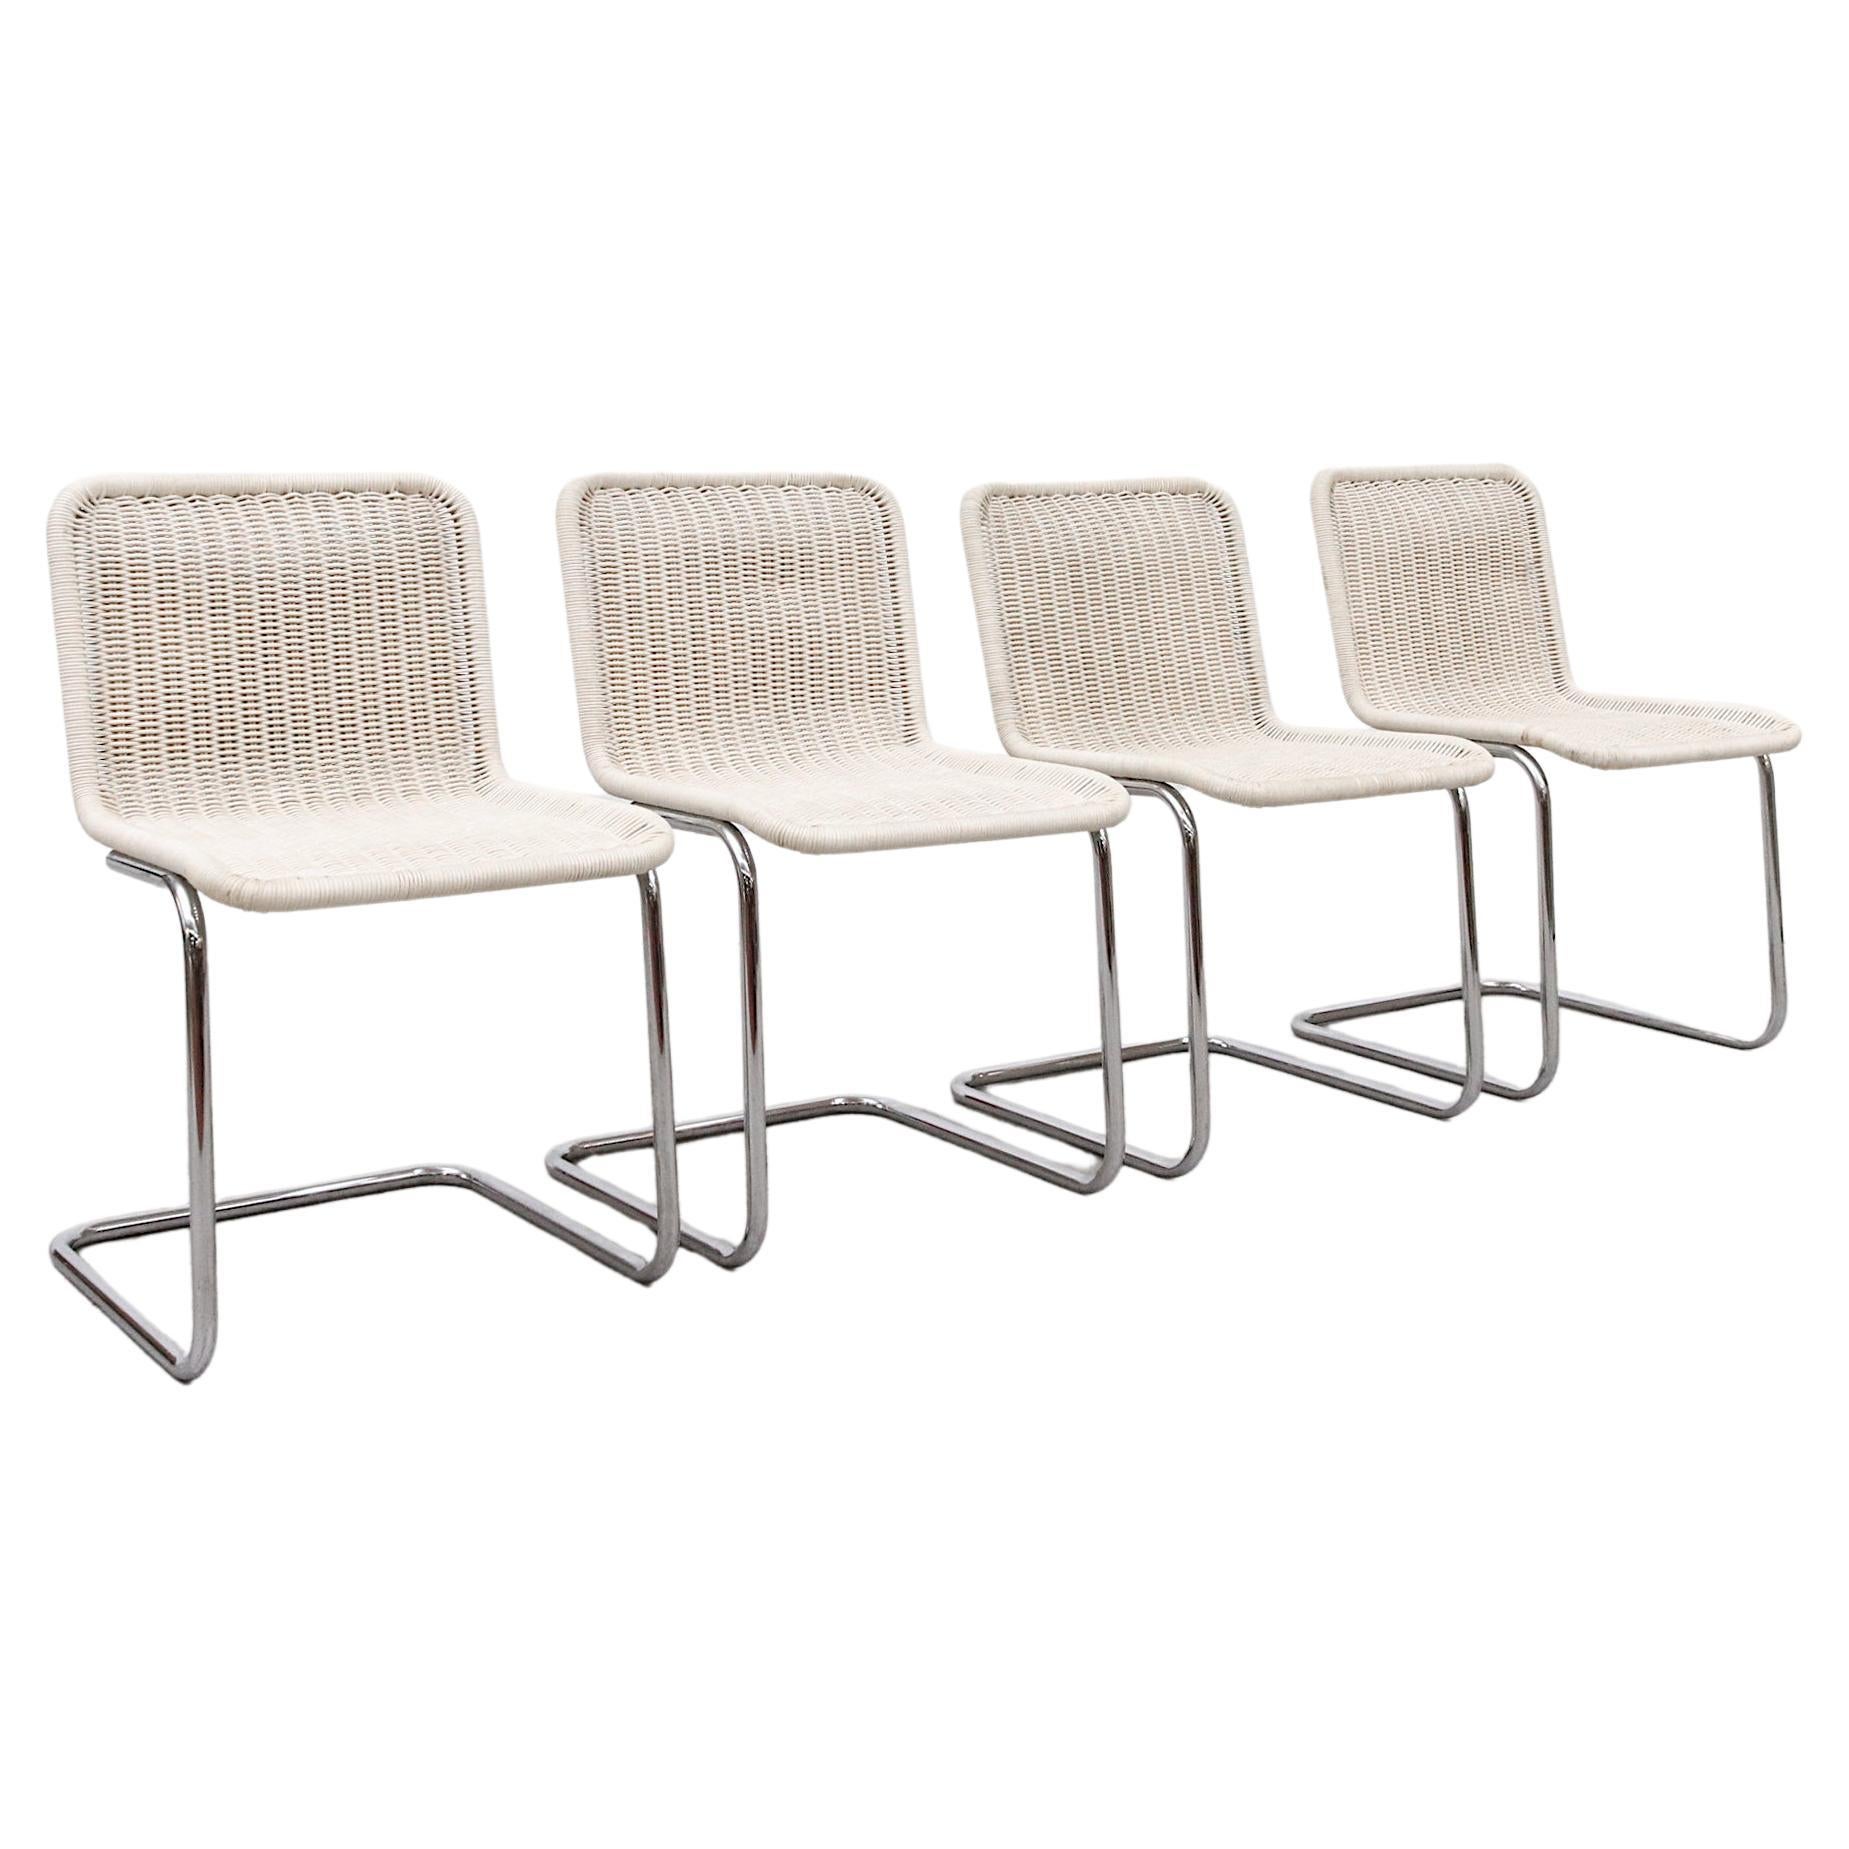 Set of 4 Marcel Breuer Style Woven Rattan and Chrome Chairs